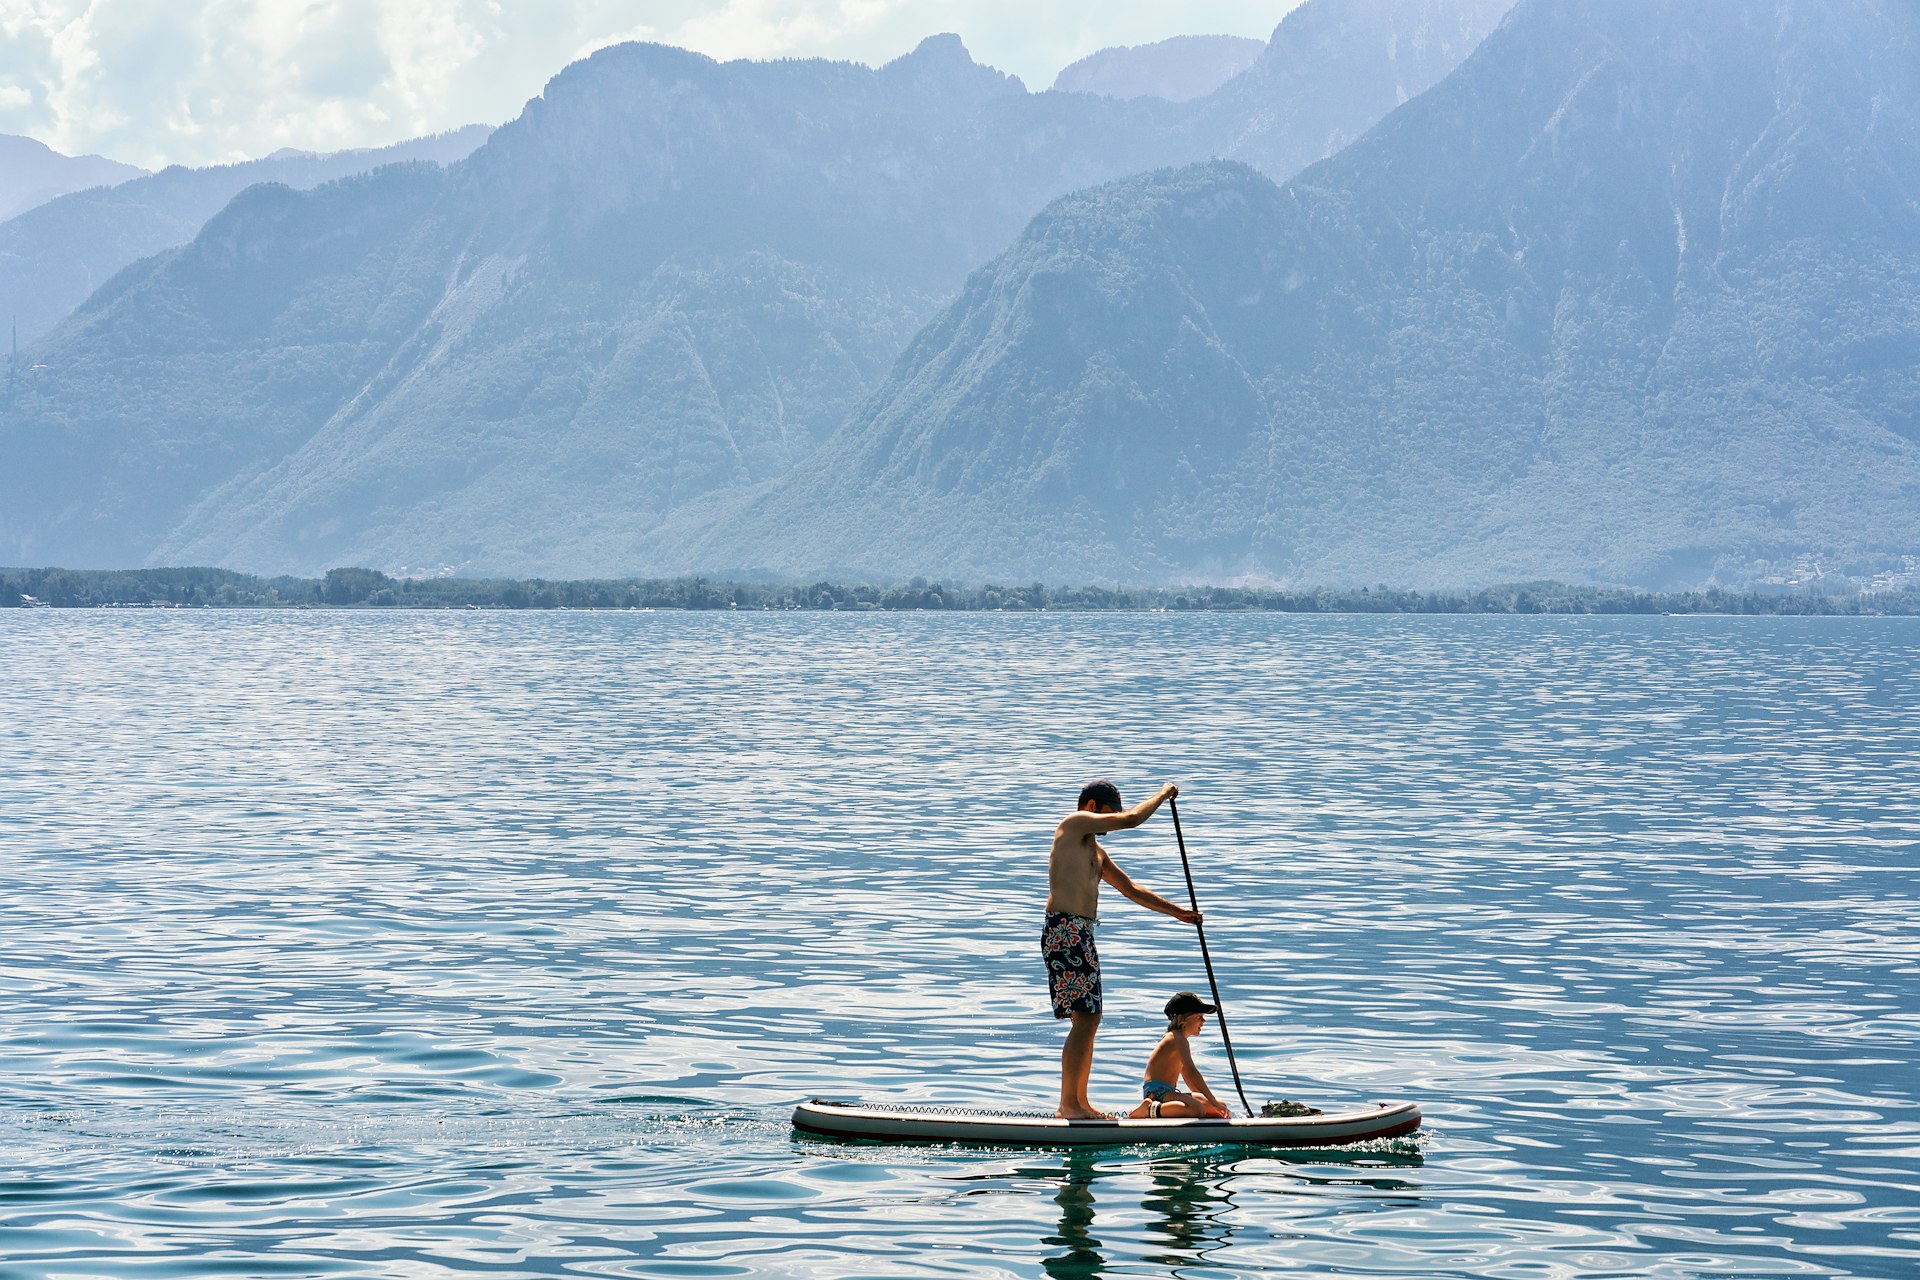 A young man  paddle boards along placid denim-blue waters almost the same color as the steep mountains behind the lake. He wears blue and green swim trunks and a toddler in a baseball cap sits on the front of the paddle board.